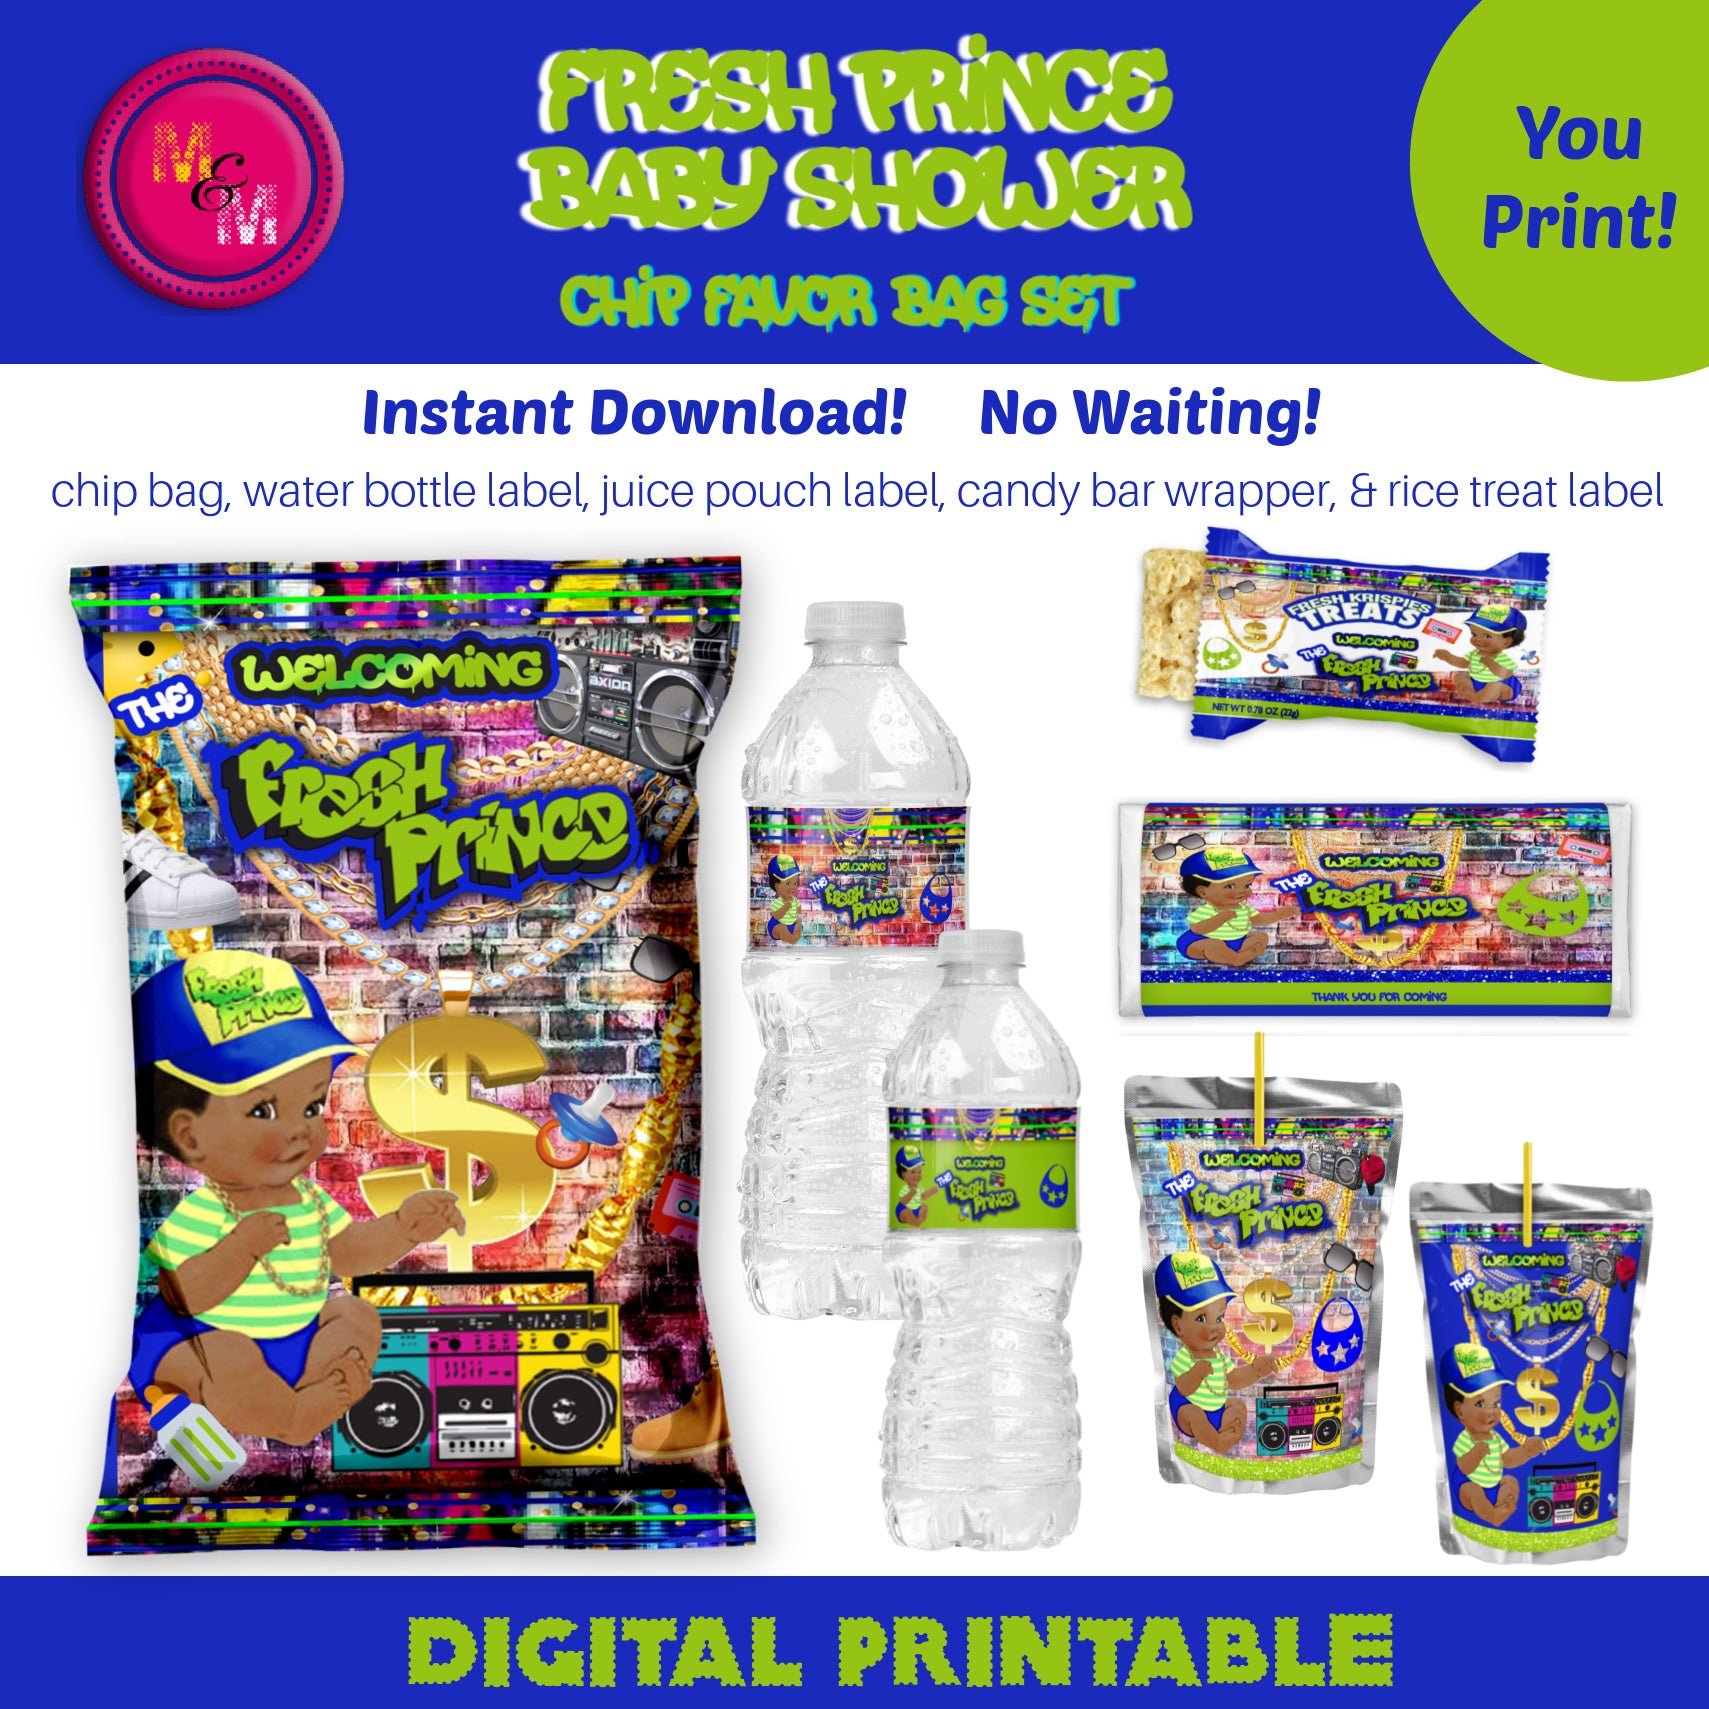 Instant Download Fresh Prince Baby Shower Favors, Fresh Prince Chip Bag Set, Hip-Hop Baby Shower, Fresh Rice Treats, 90's Baby Shower